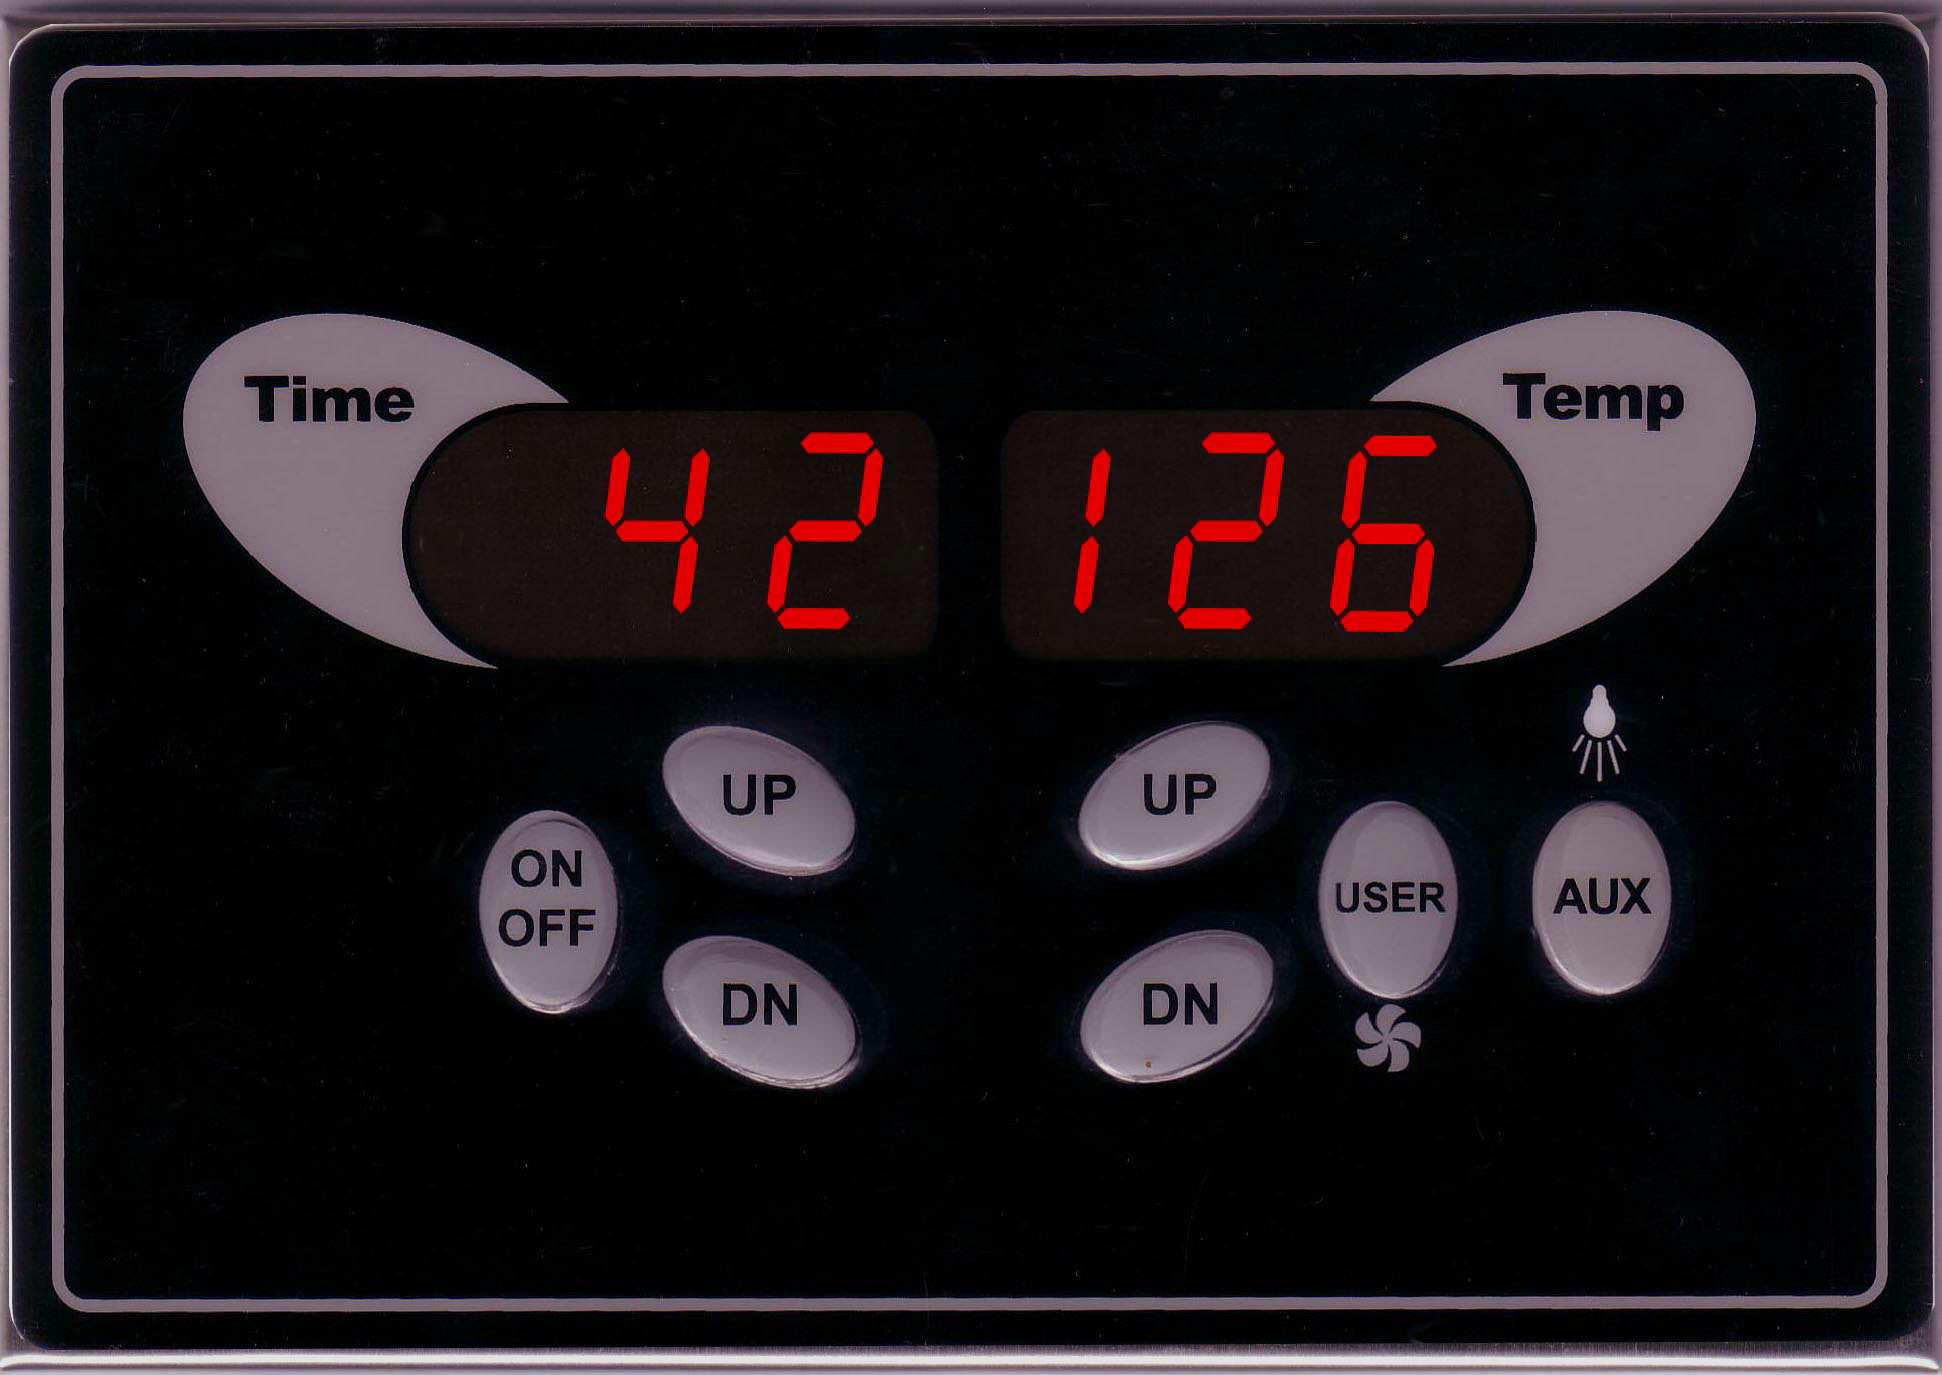 Thermostats with Timer and Temperature difference controllers